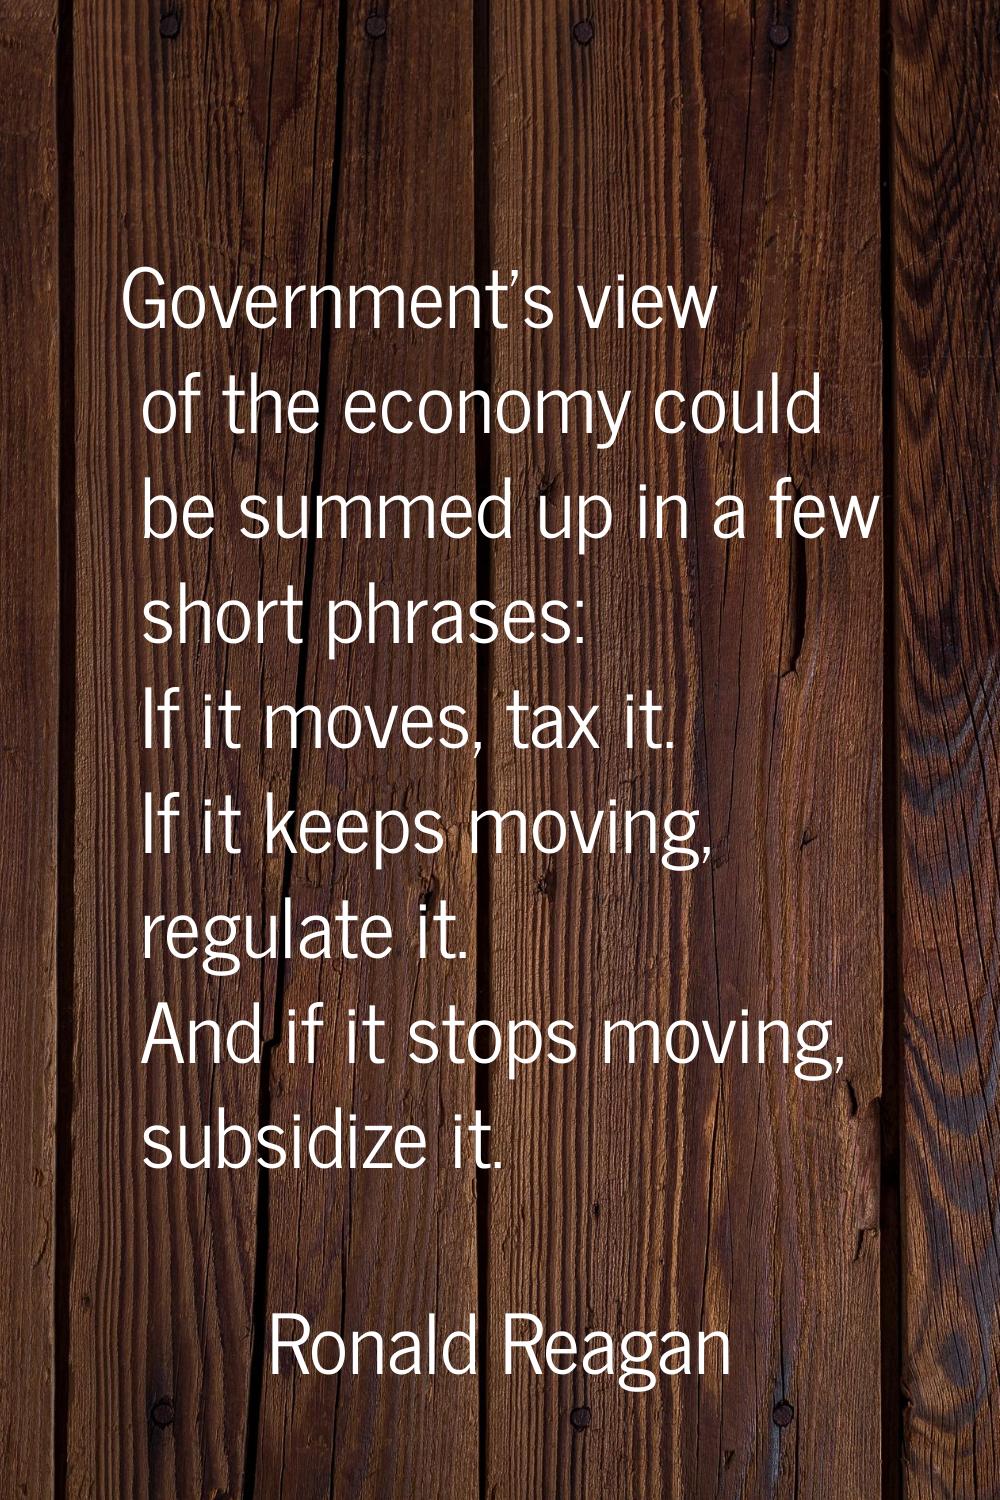 Government's view of the economy could be summed up in a few short phrases: If it moves, tax it. If